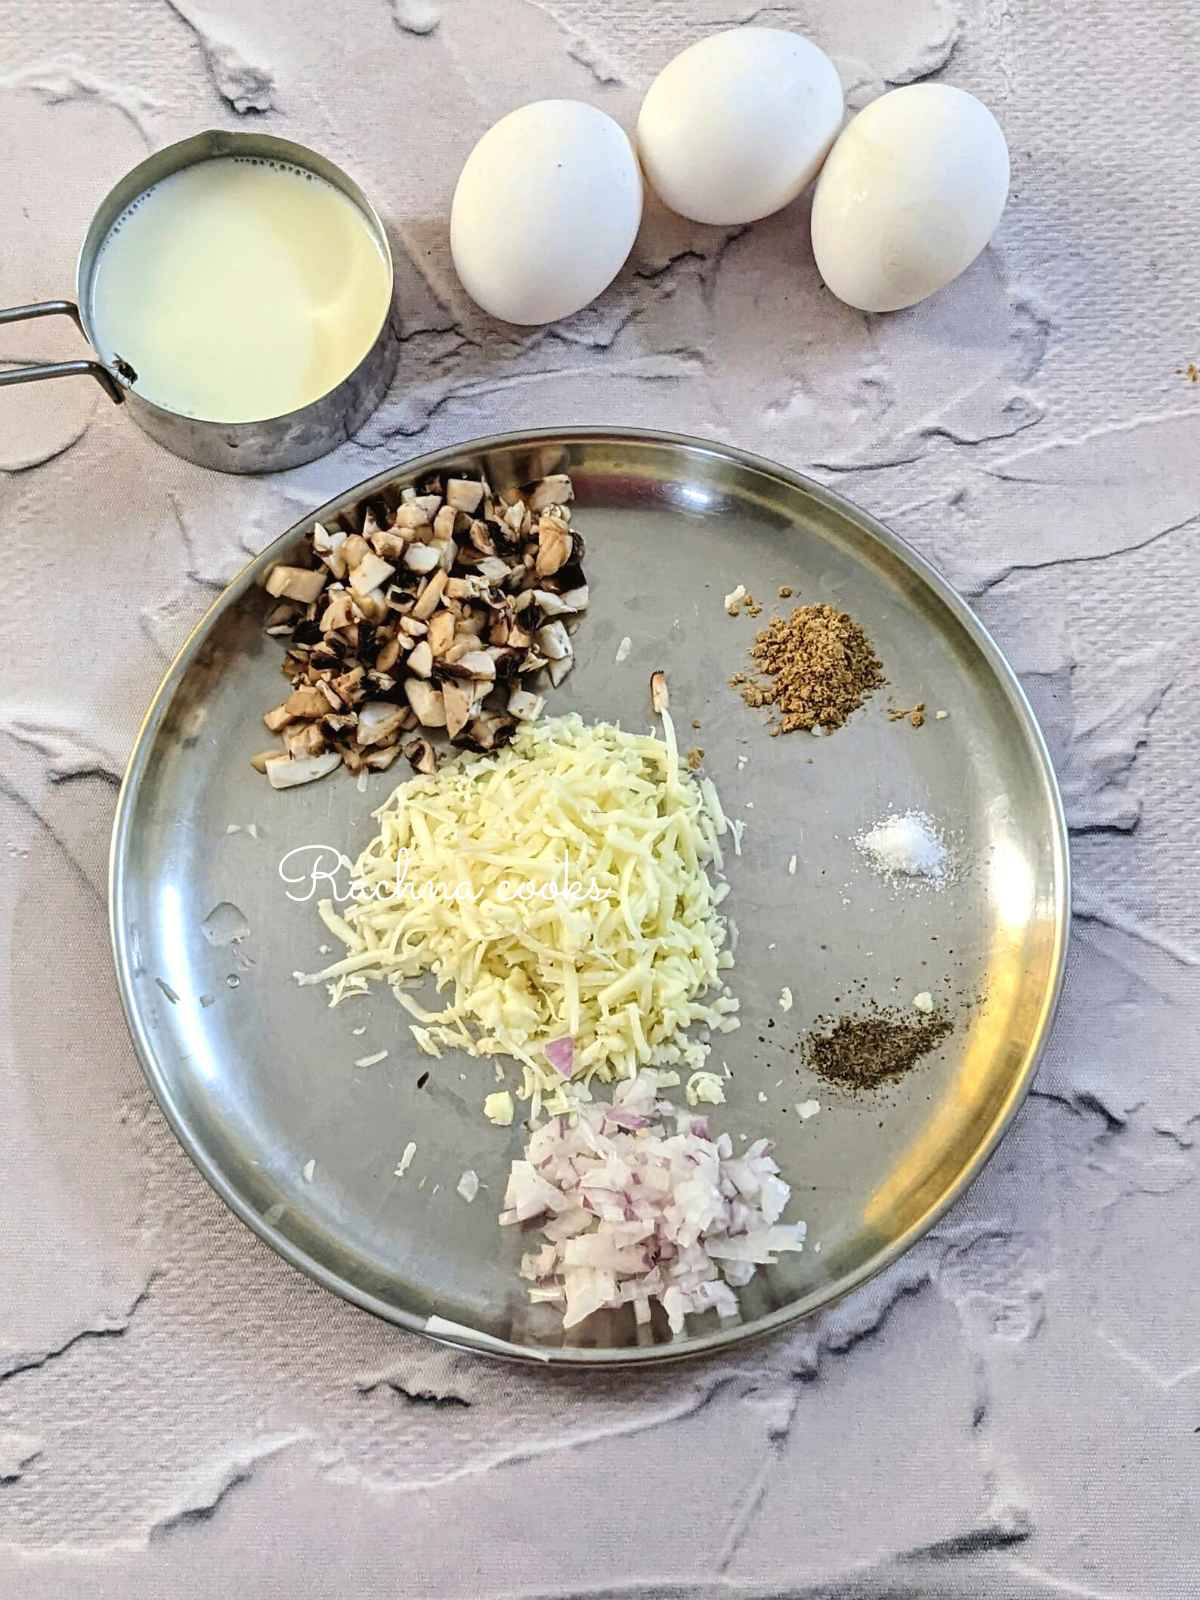 Ingredients for making egg bites: whole eggs, milk, cheese, garlic powder, salt, pepper, chopped mushroom and onion on a plate.